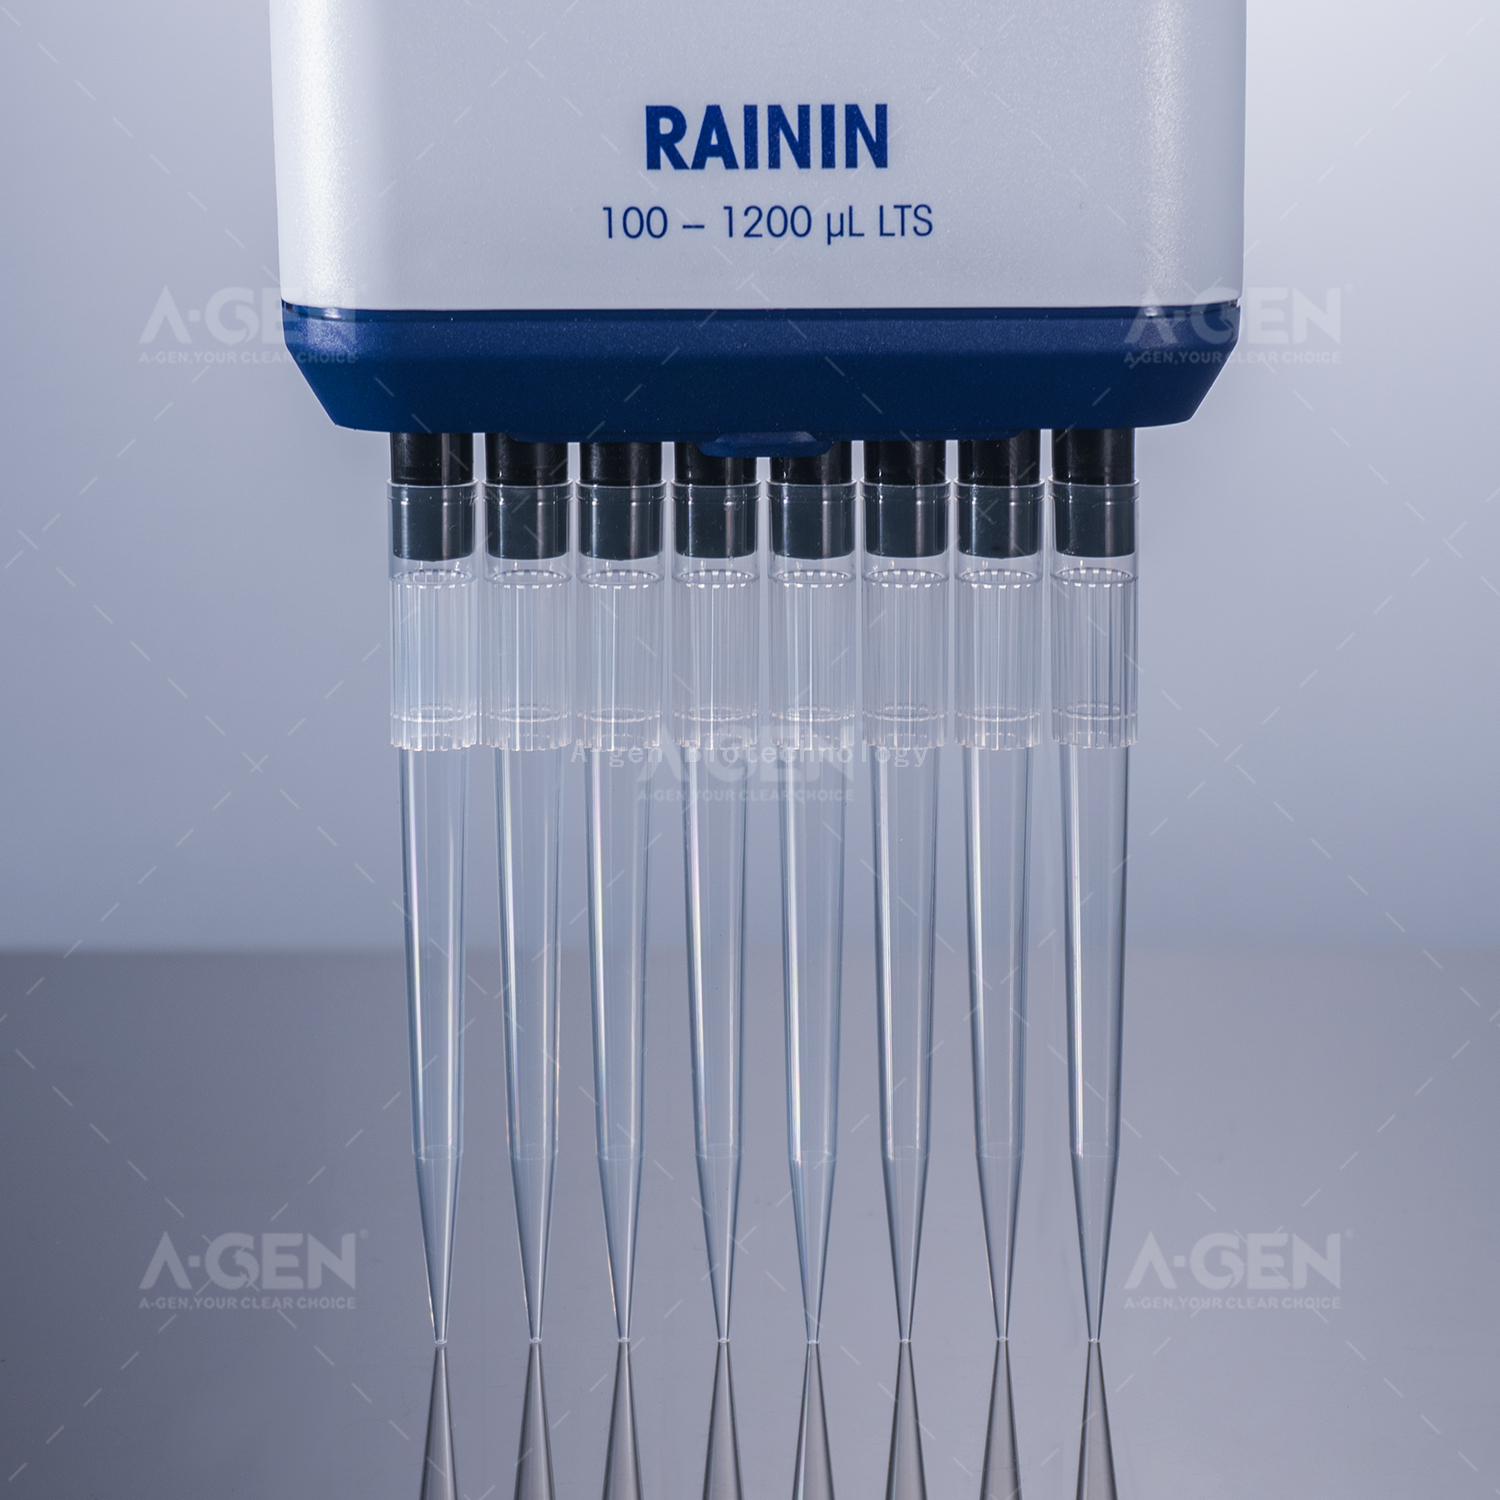 Rainin 1000uL Transparent Tips with Packed in Bag